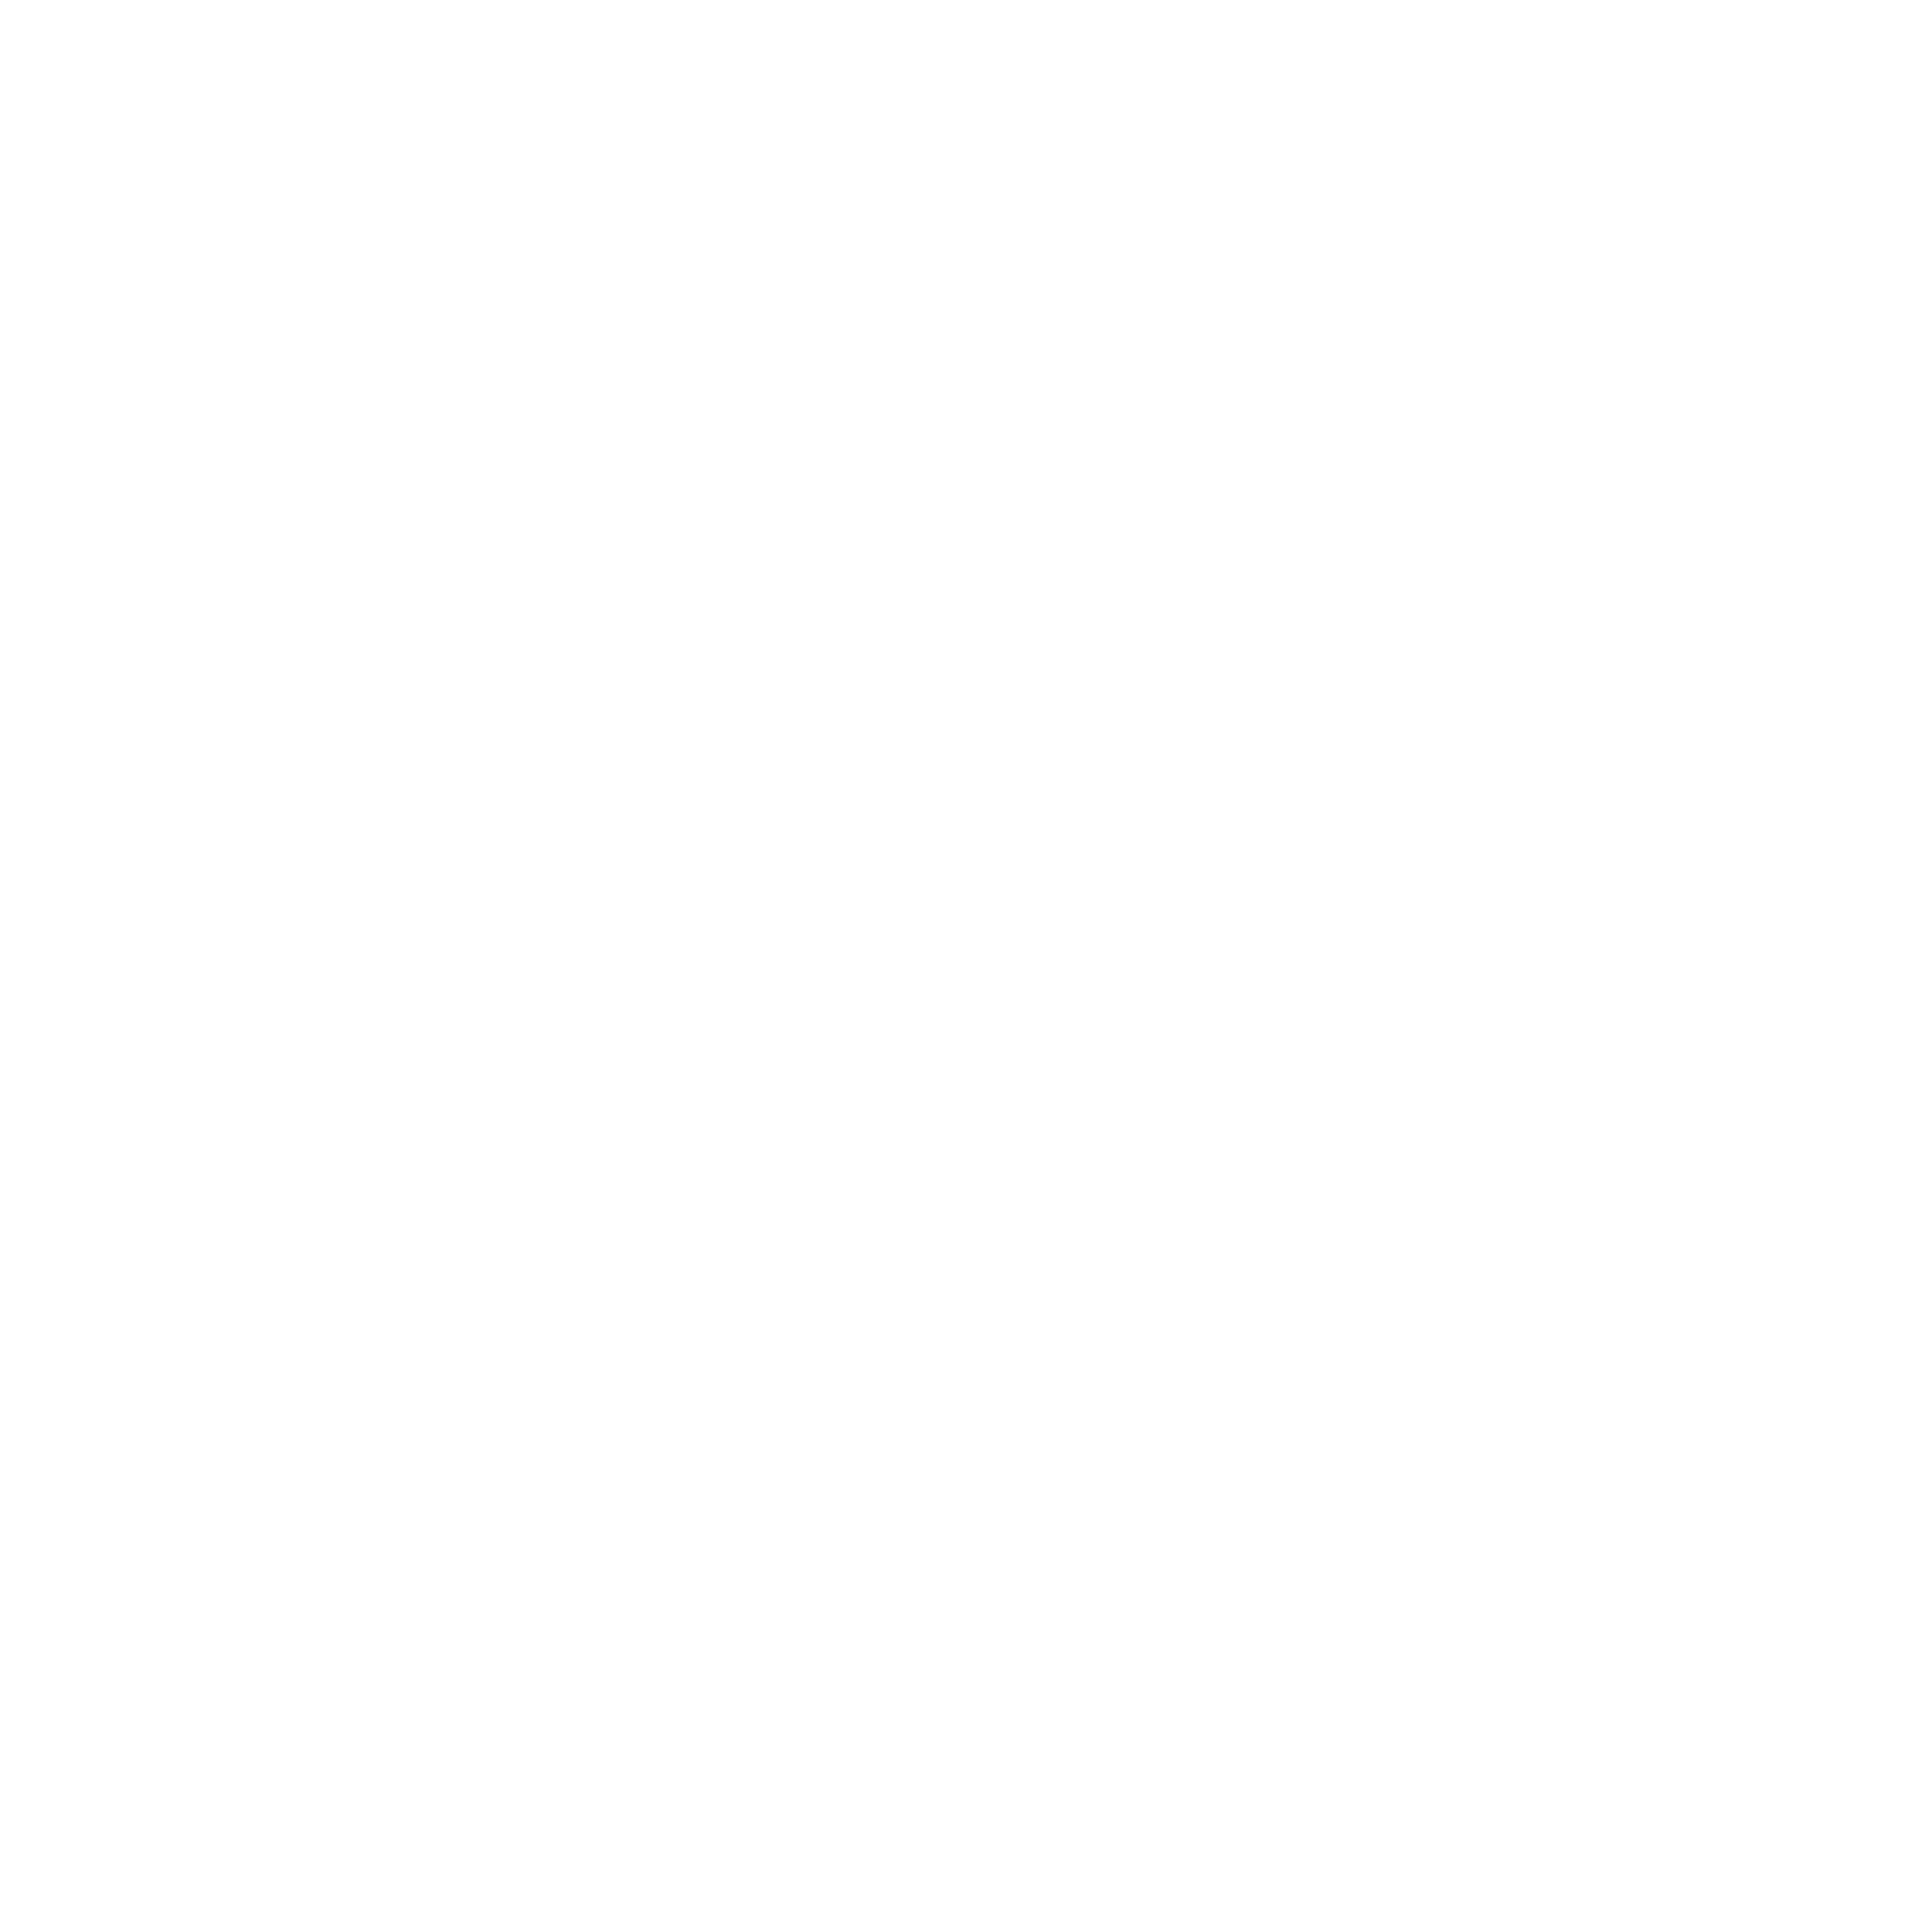 This is the City of Princeton, WV Seal. It is in white with "Incorporated February 20, 1909" located in the inner circle, and a "P" in the very center of the seal.